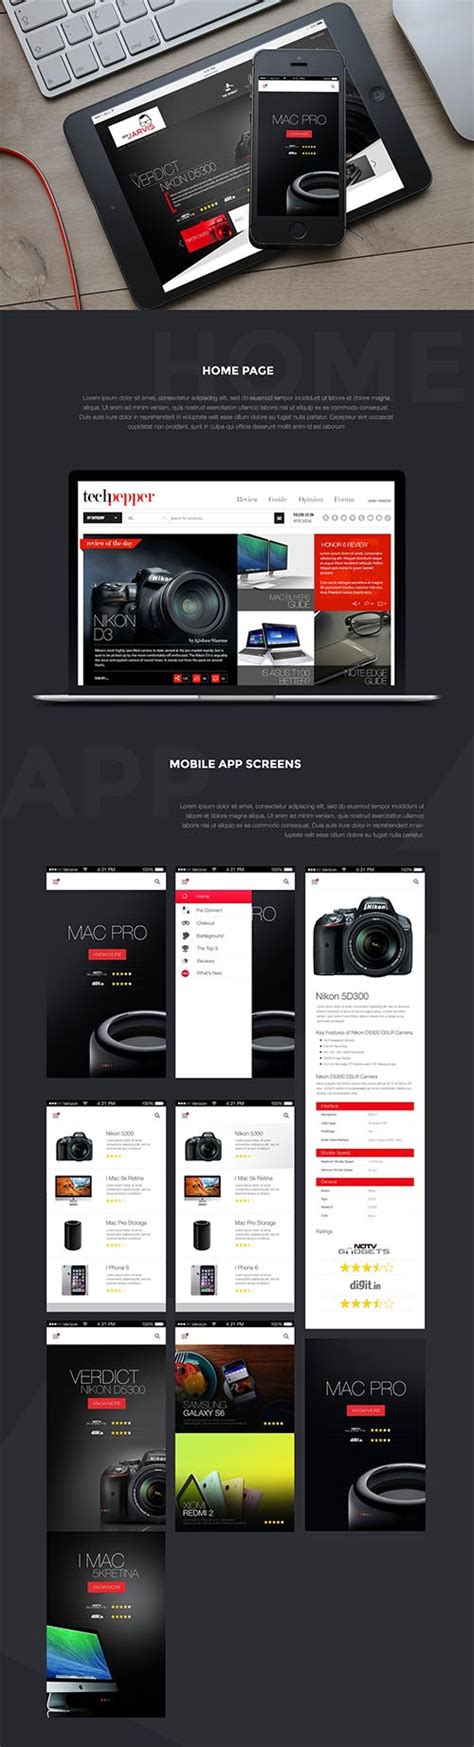 22 mobile design concepts with interface illustrations. Web & Mobile UI UX Designs for Inspiration - 72 ...